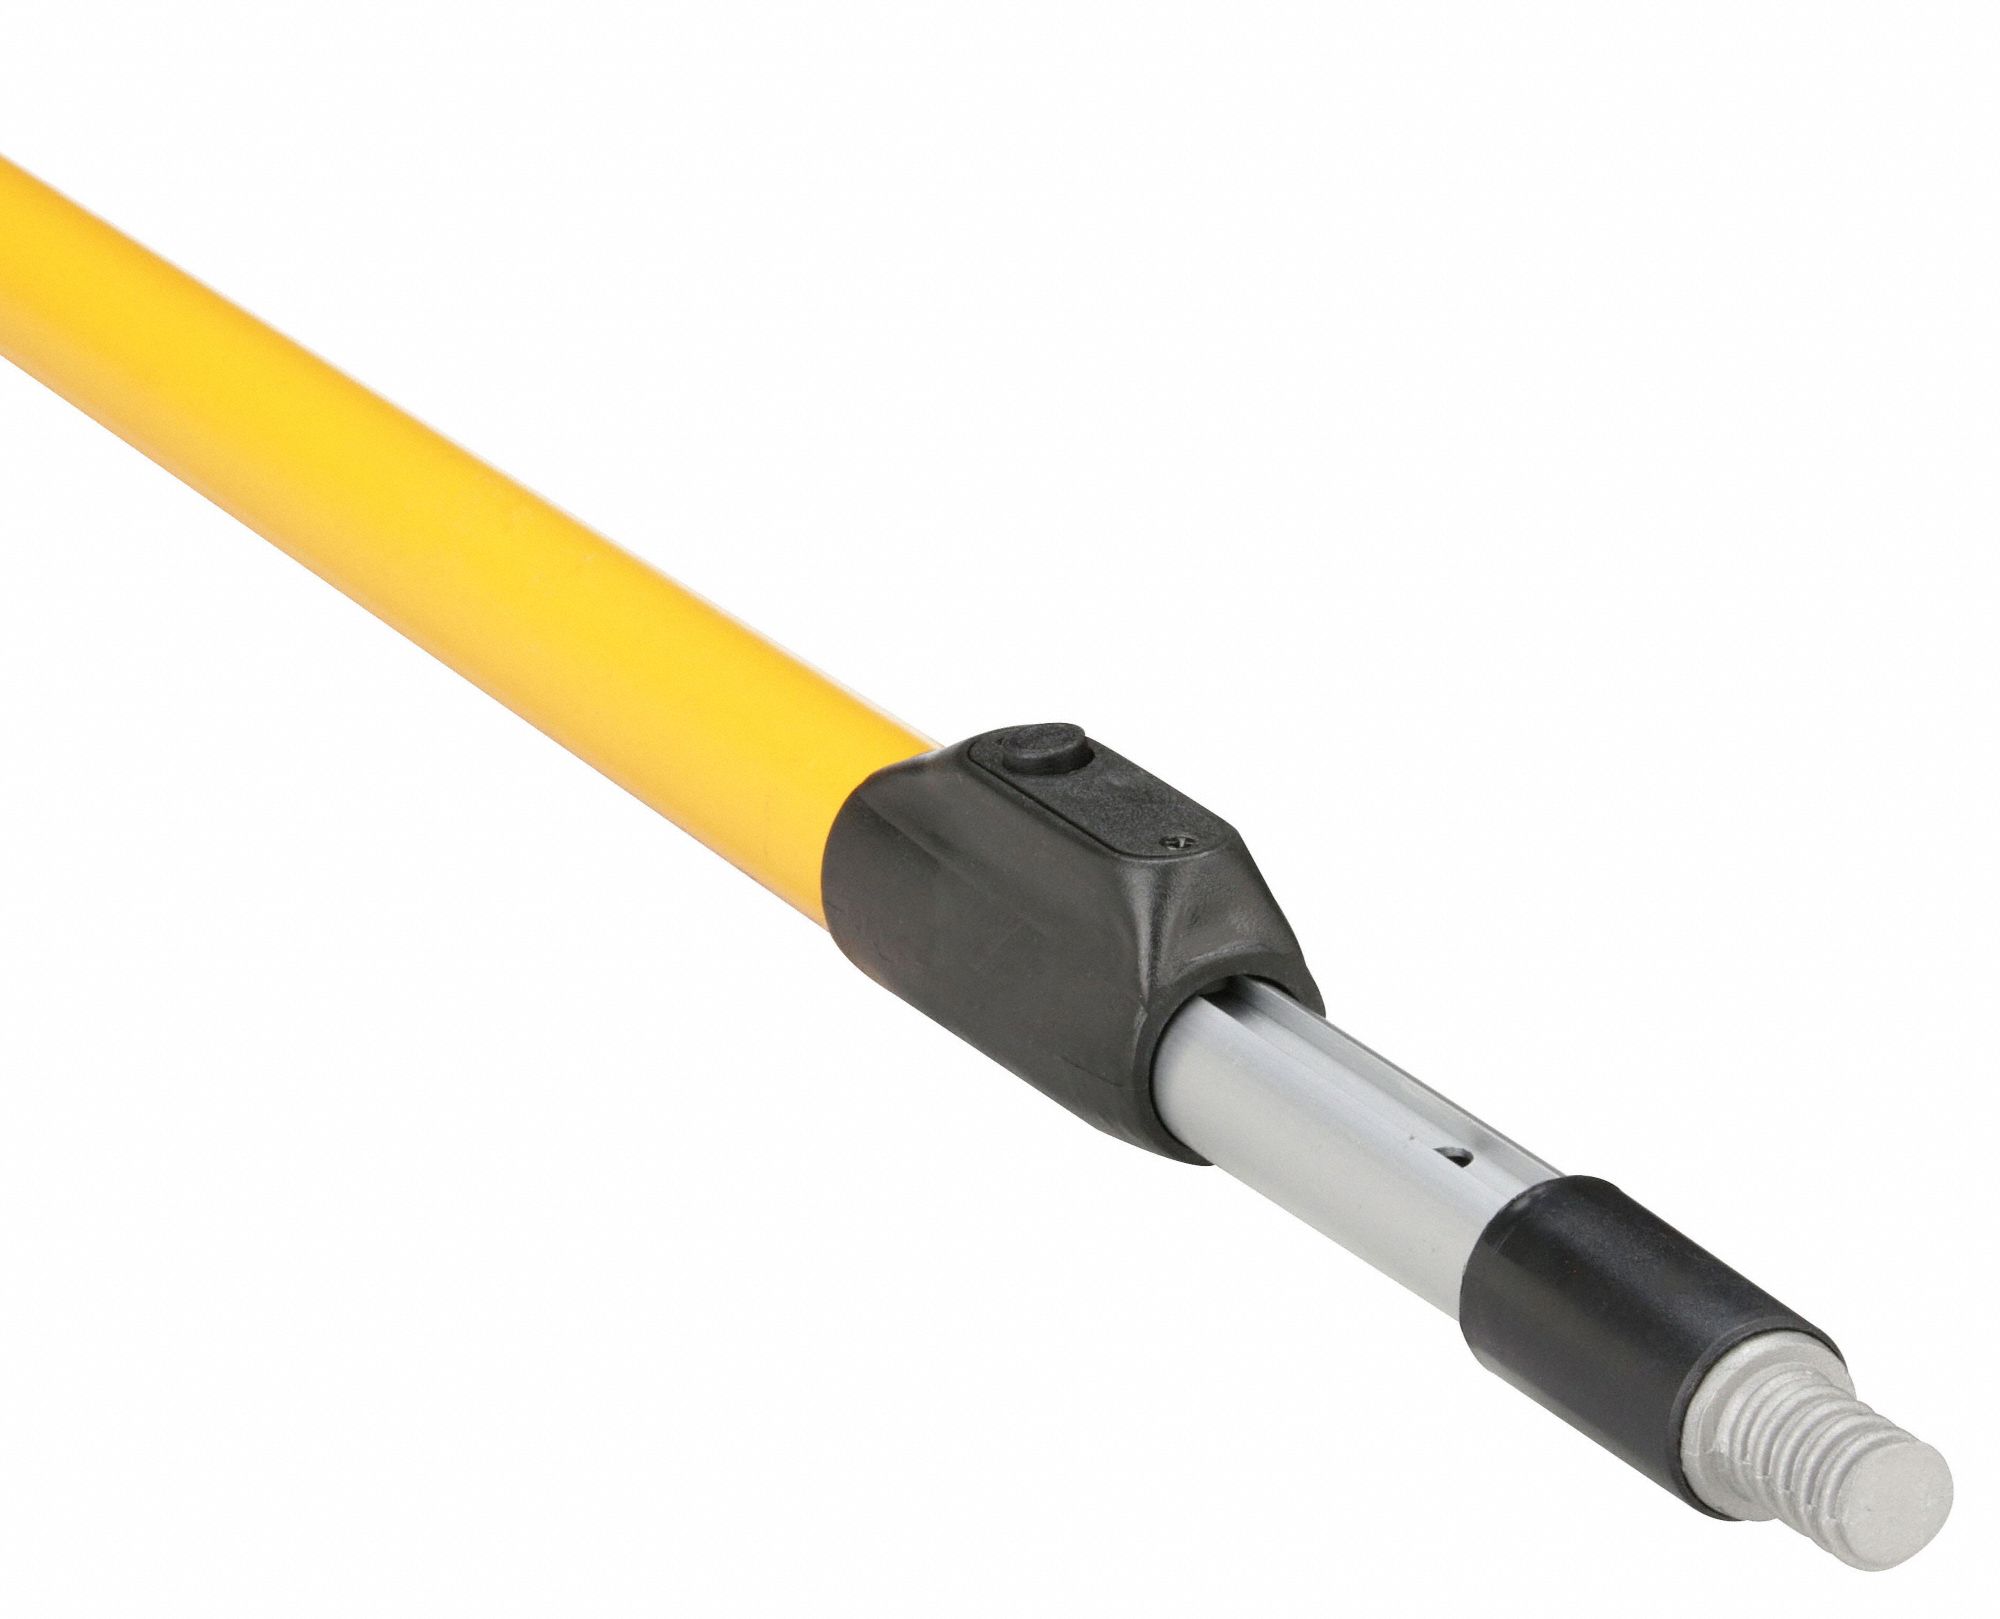 APPROVED VENDOR HEAVY DUTY EXTENSION POLE 8 TO 16 F - Paint Roller Extension  Poles - GGM1UFN9